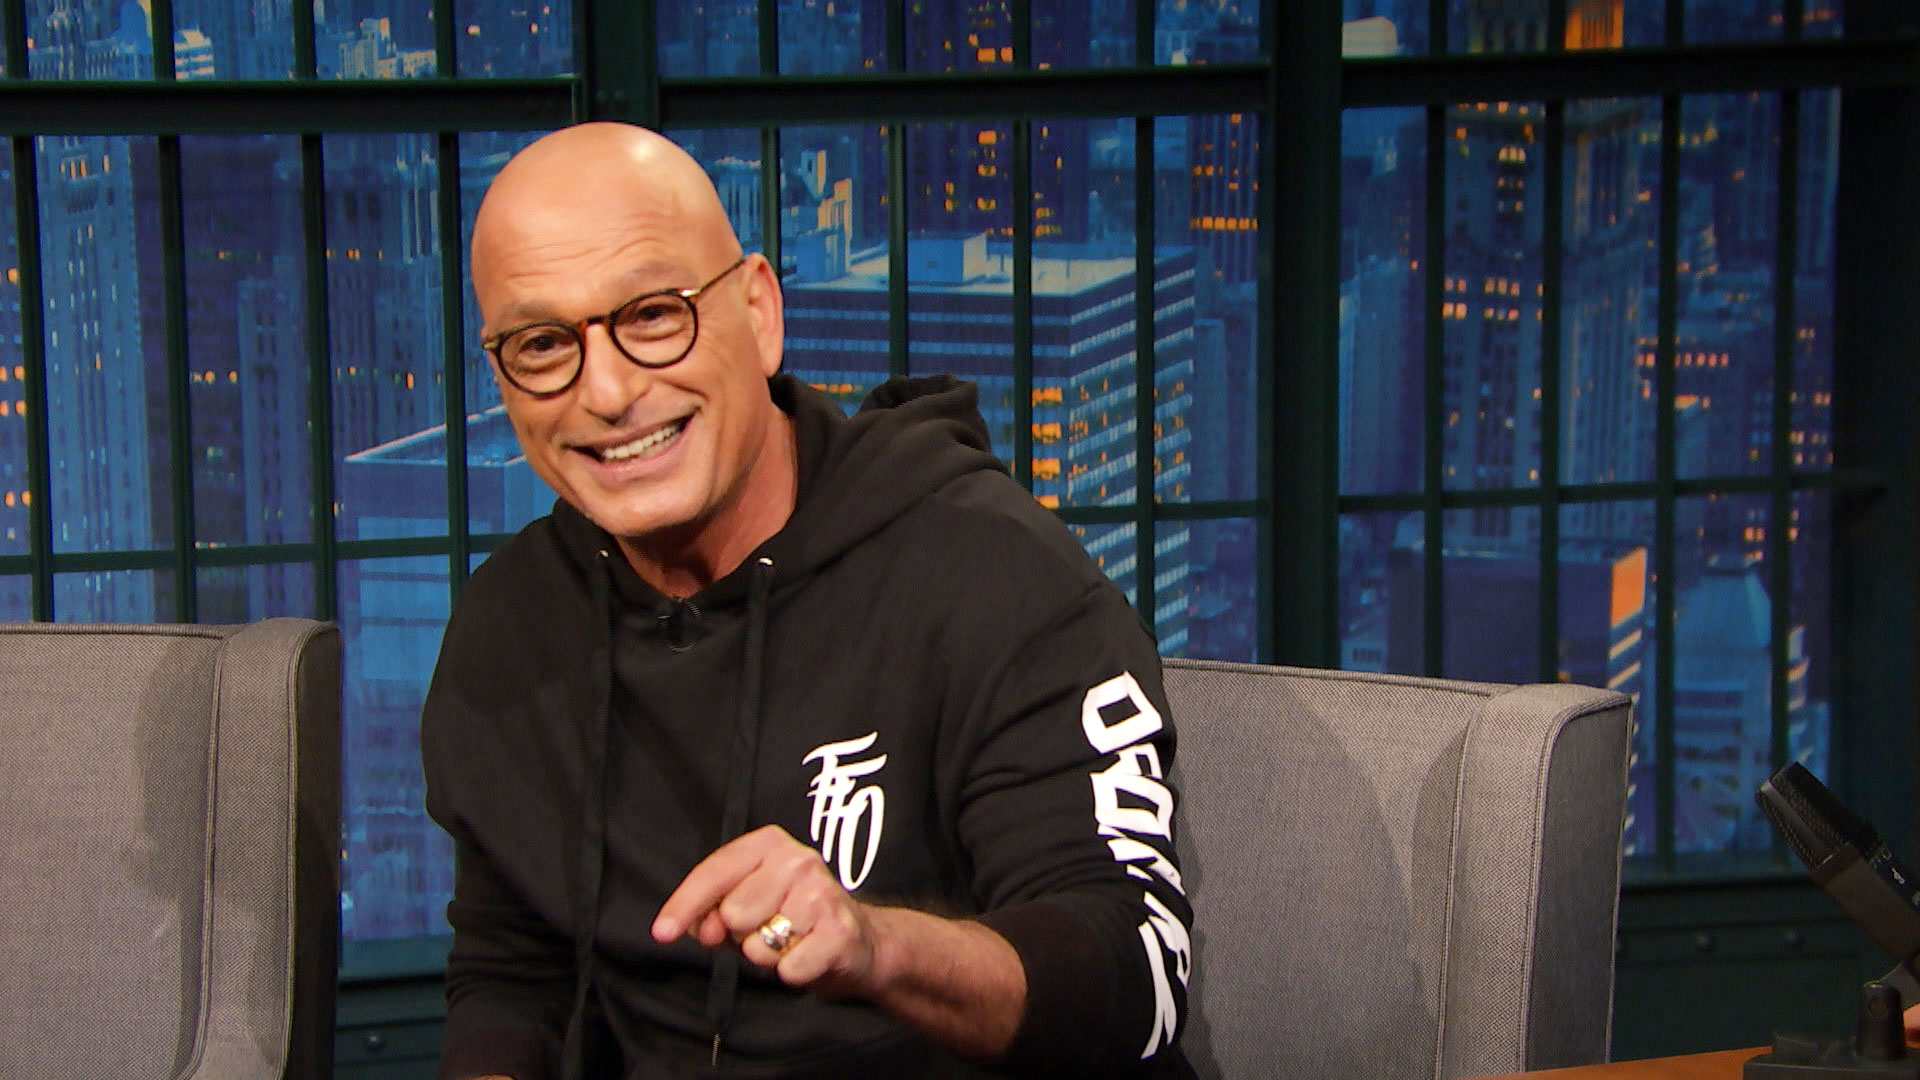 Howie Mandel Has Been Judging America's Got Talent While Legally Blind...